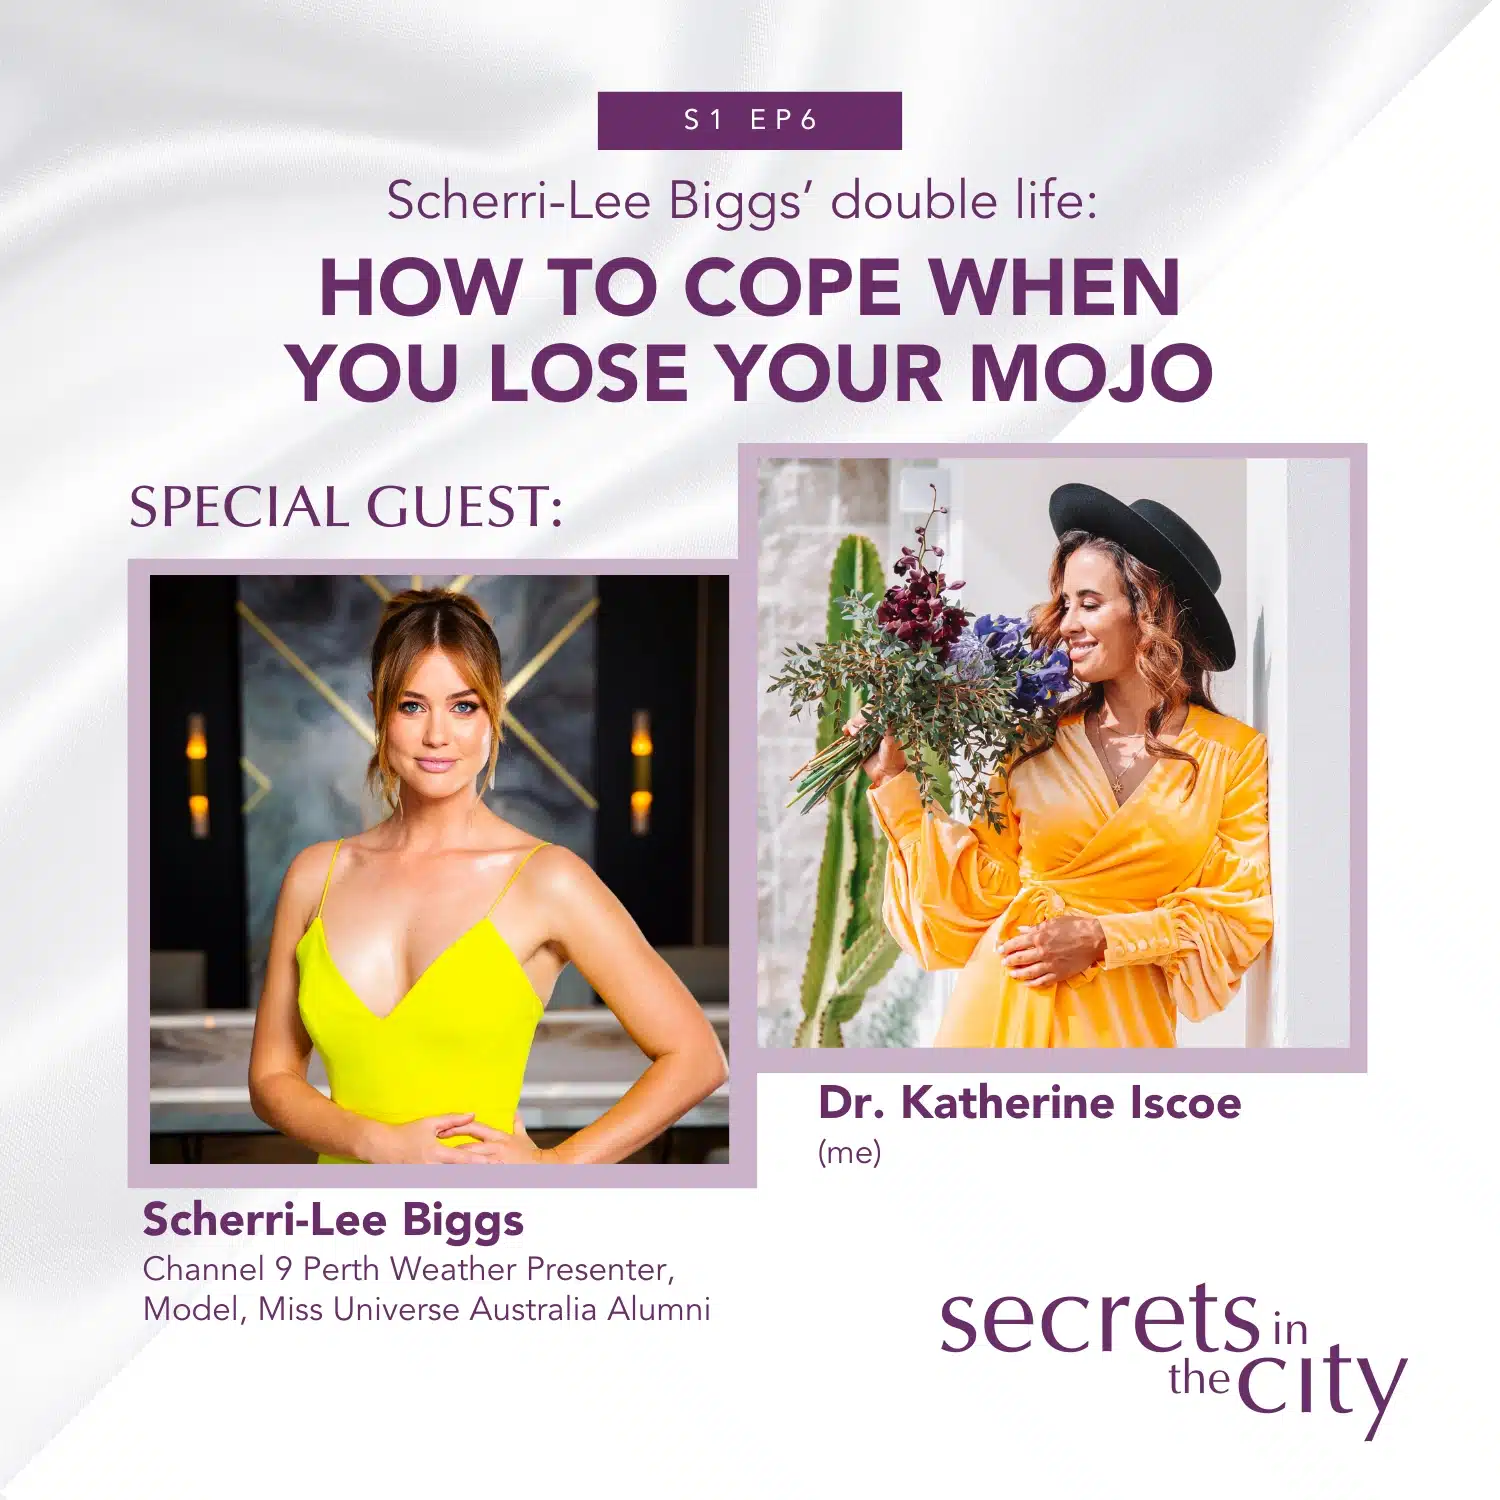 Scherri-Lee Biggs Double Life Podcast - Secrets in the City podcast cover featuring photos of Sherri-Lee Biggs and Dr. Katherine Iscoe